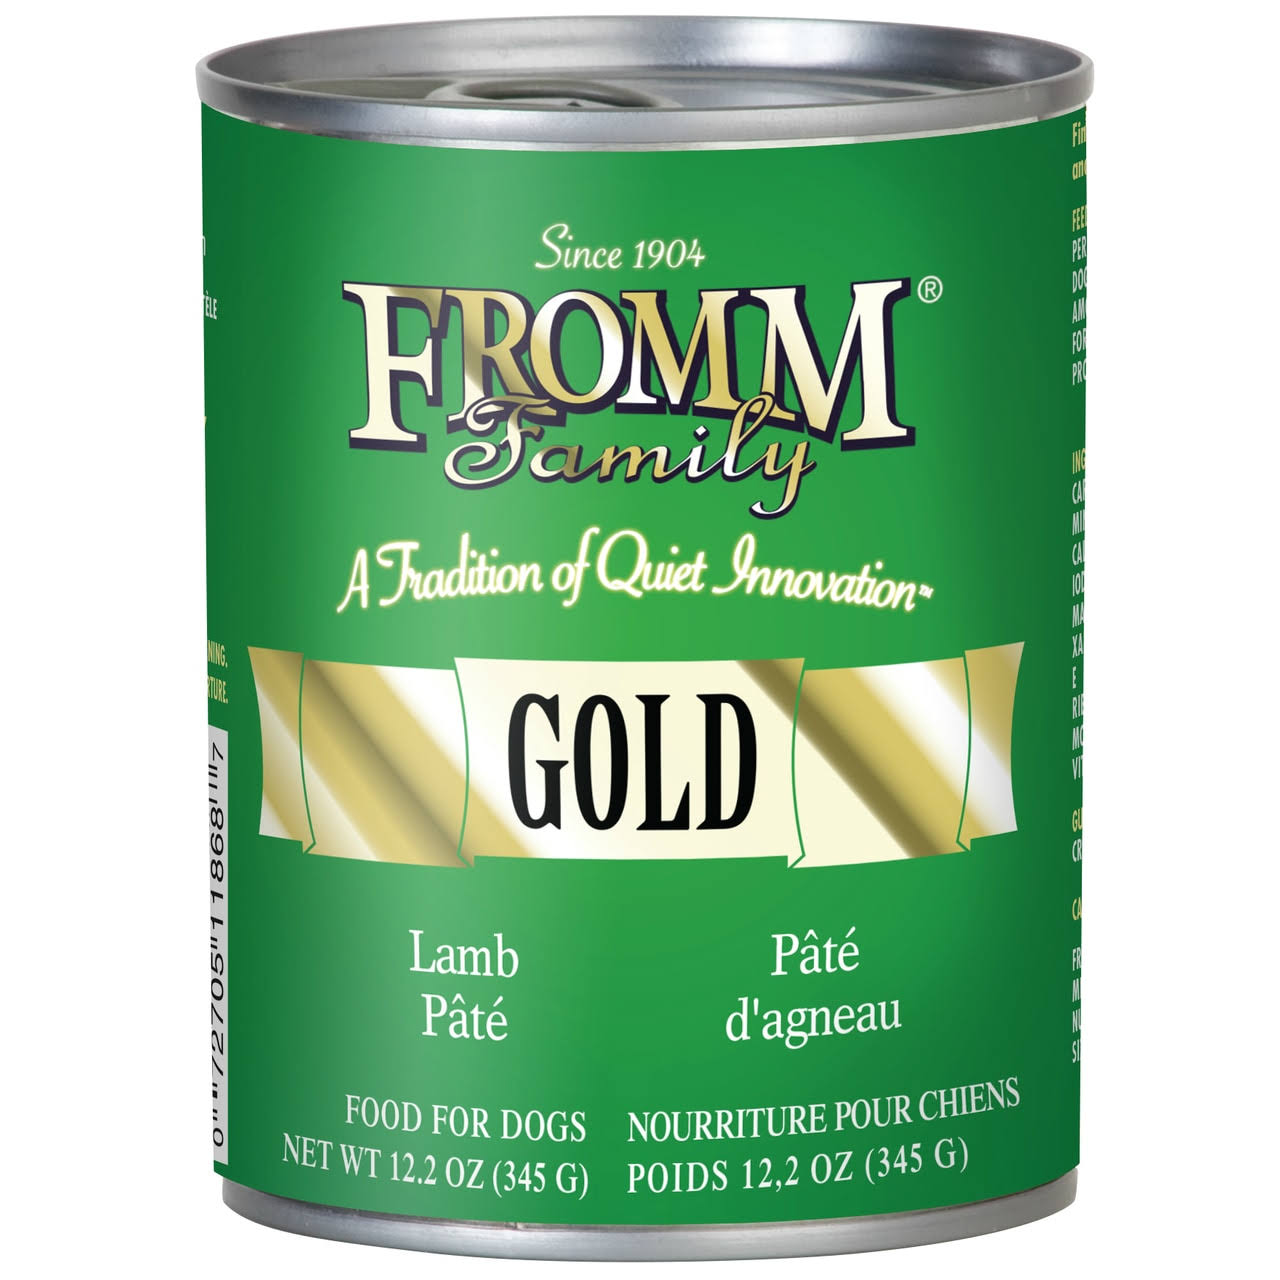 Fromm Gold Lamb Pate Dog Food - 12.2 oz - Can